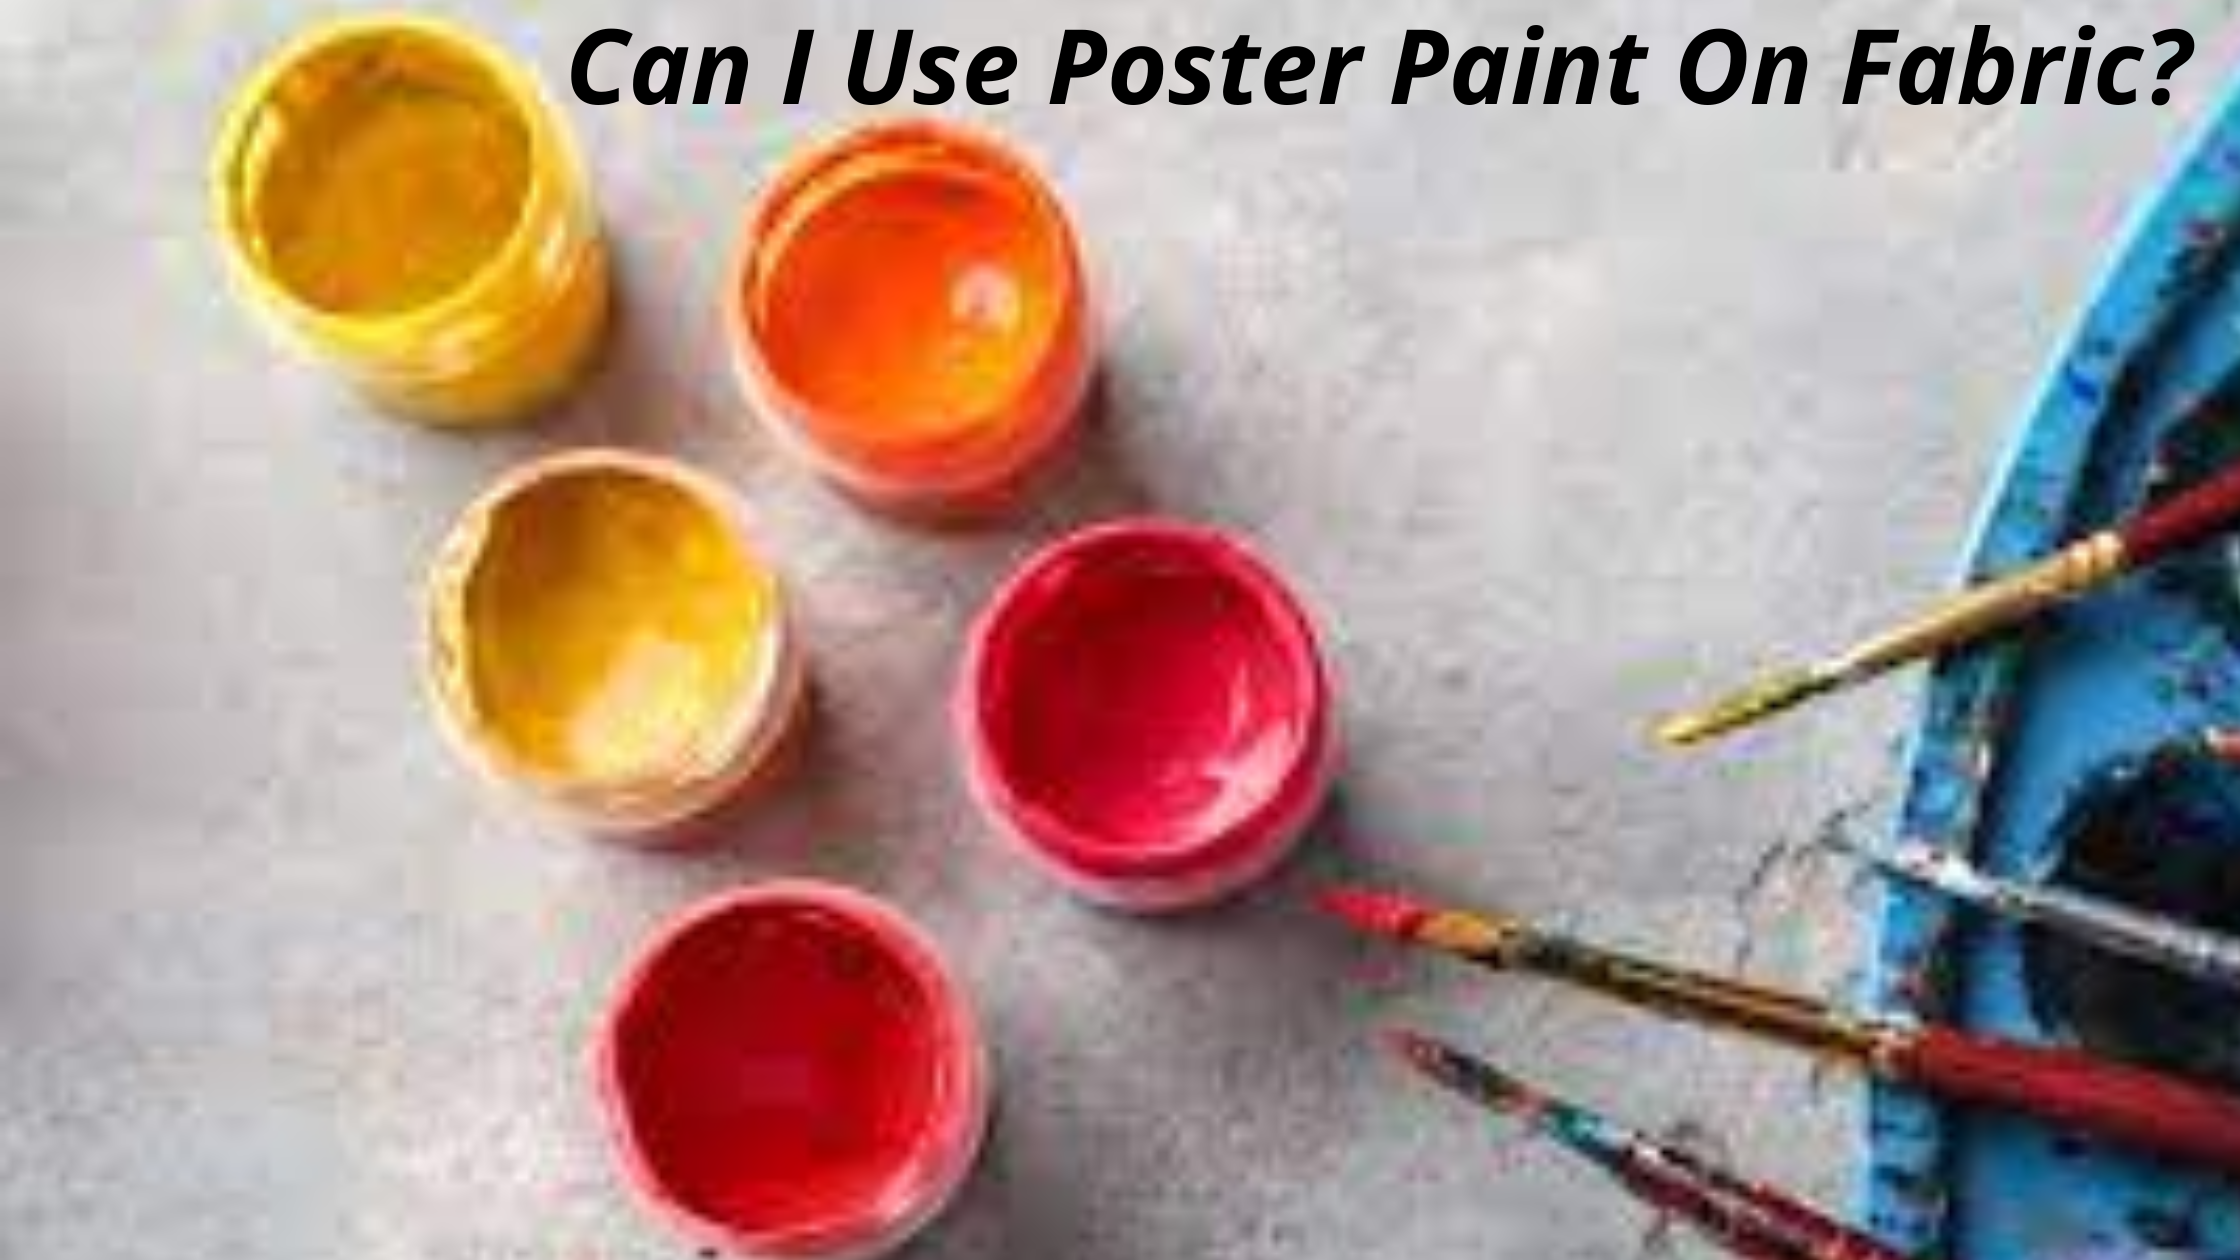 Can I Use Poster Paint On Fabric?